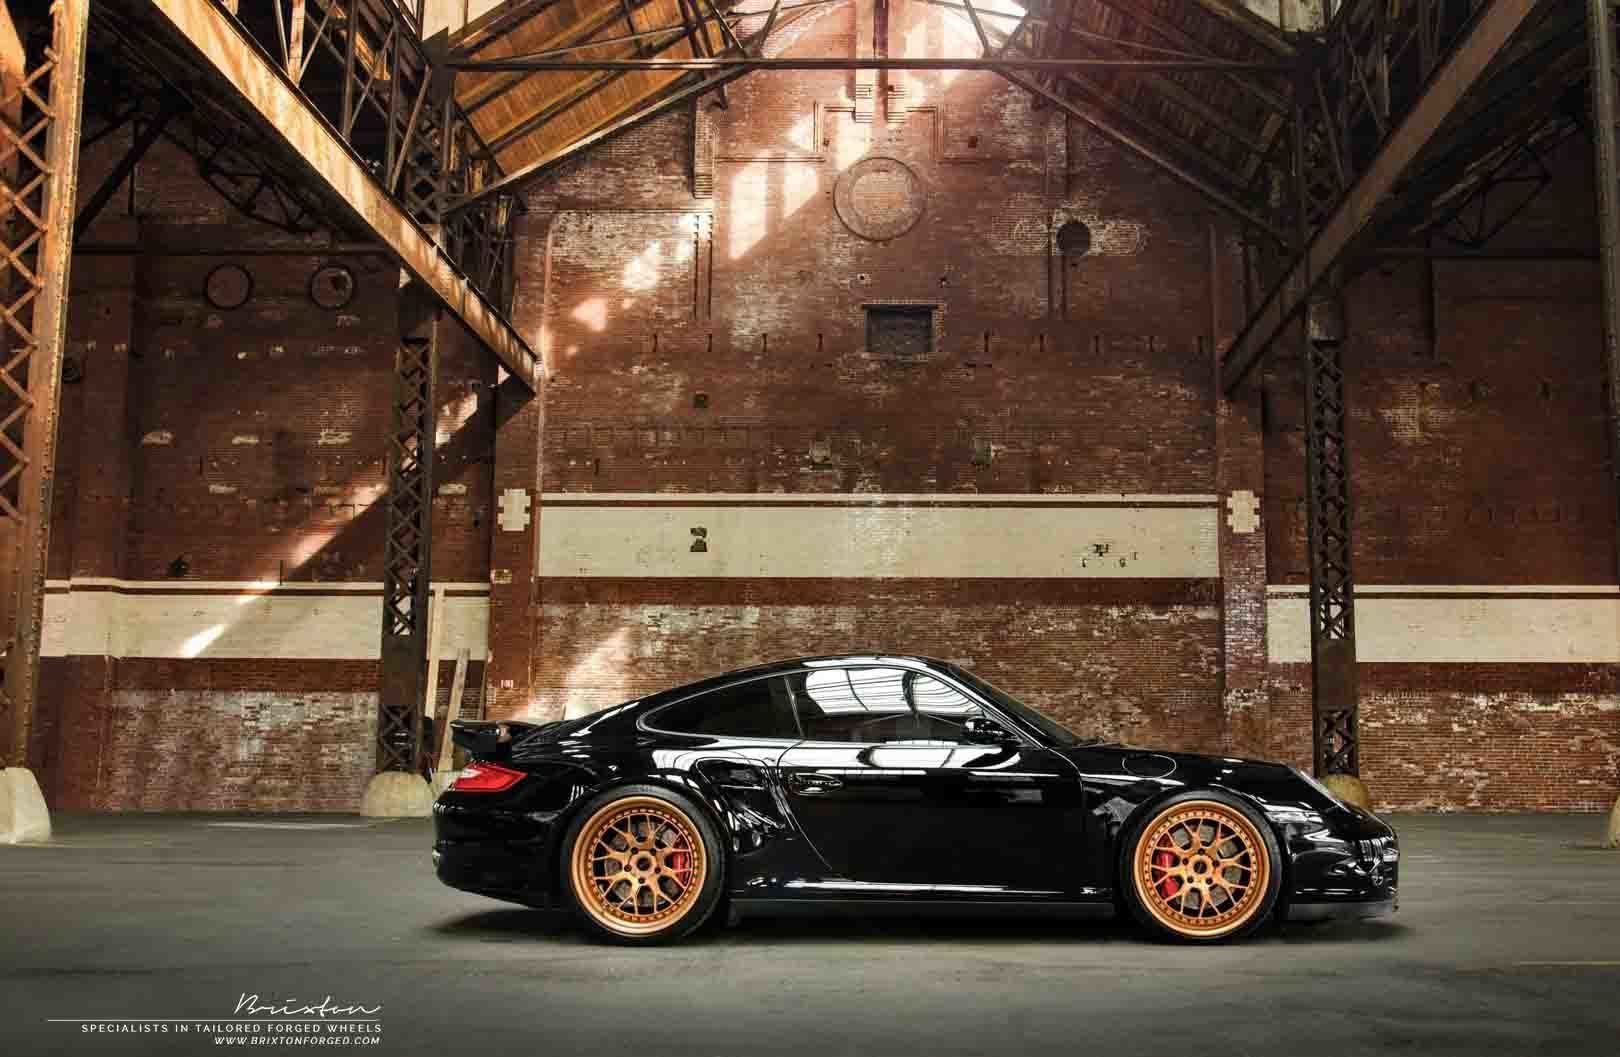 images-products-1-2684-232974972-black-porsche-997-turbo-brixton-forged-cm16-circuit-series-rose-gold-1800x1057.jpg